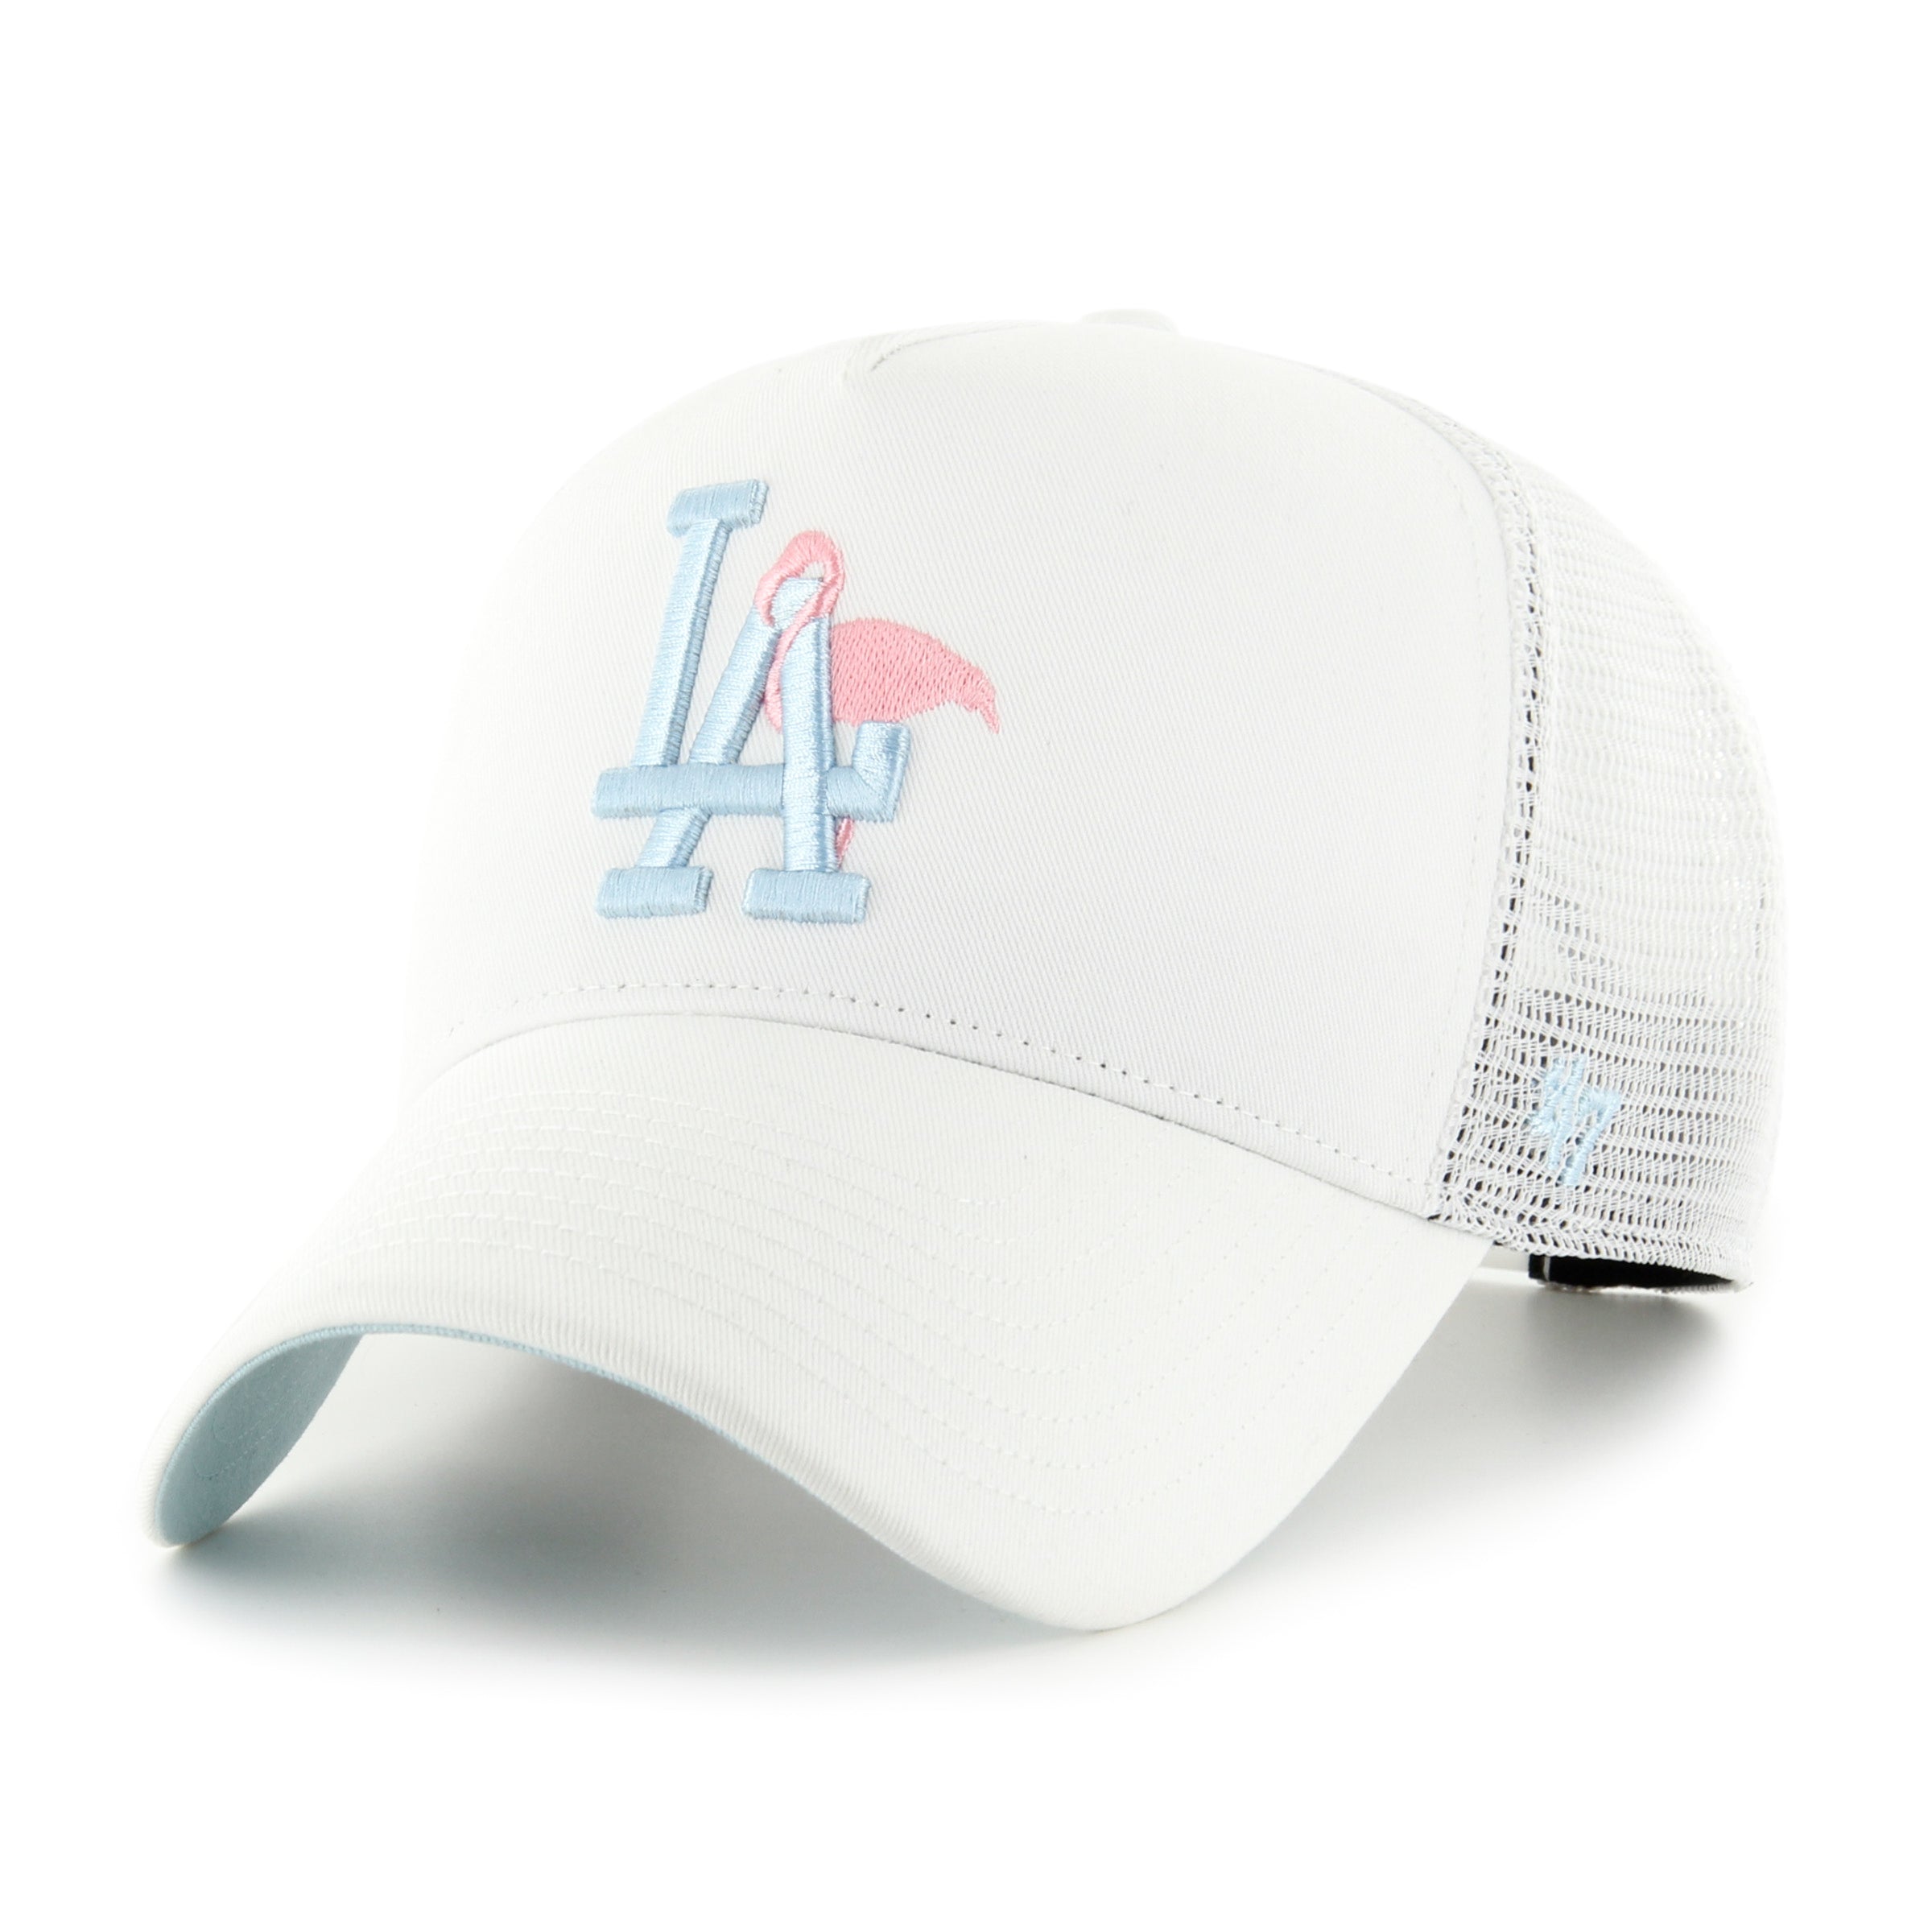 MLB LOS ANGELES DODGERS ICON MESH '47 OFFSIDE DT WHITE